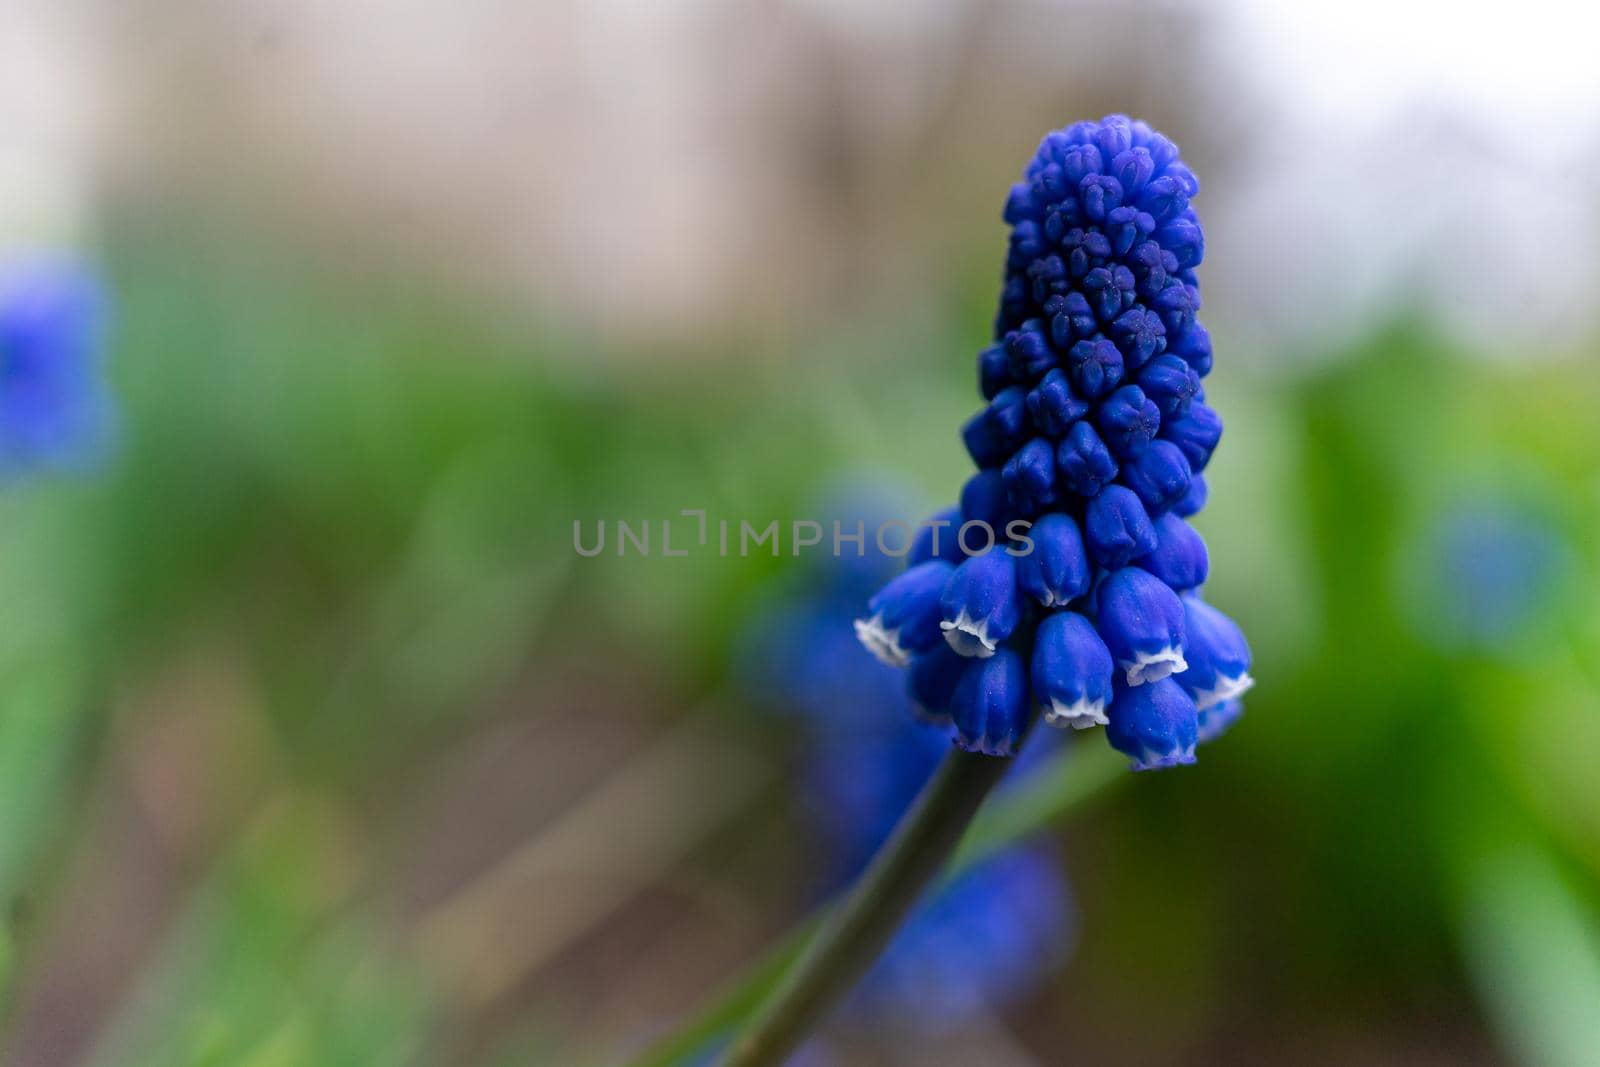 Grape hyacinth photographed close up on a flowerbed. Copy space.